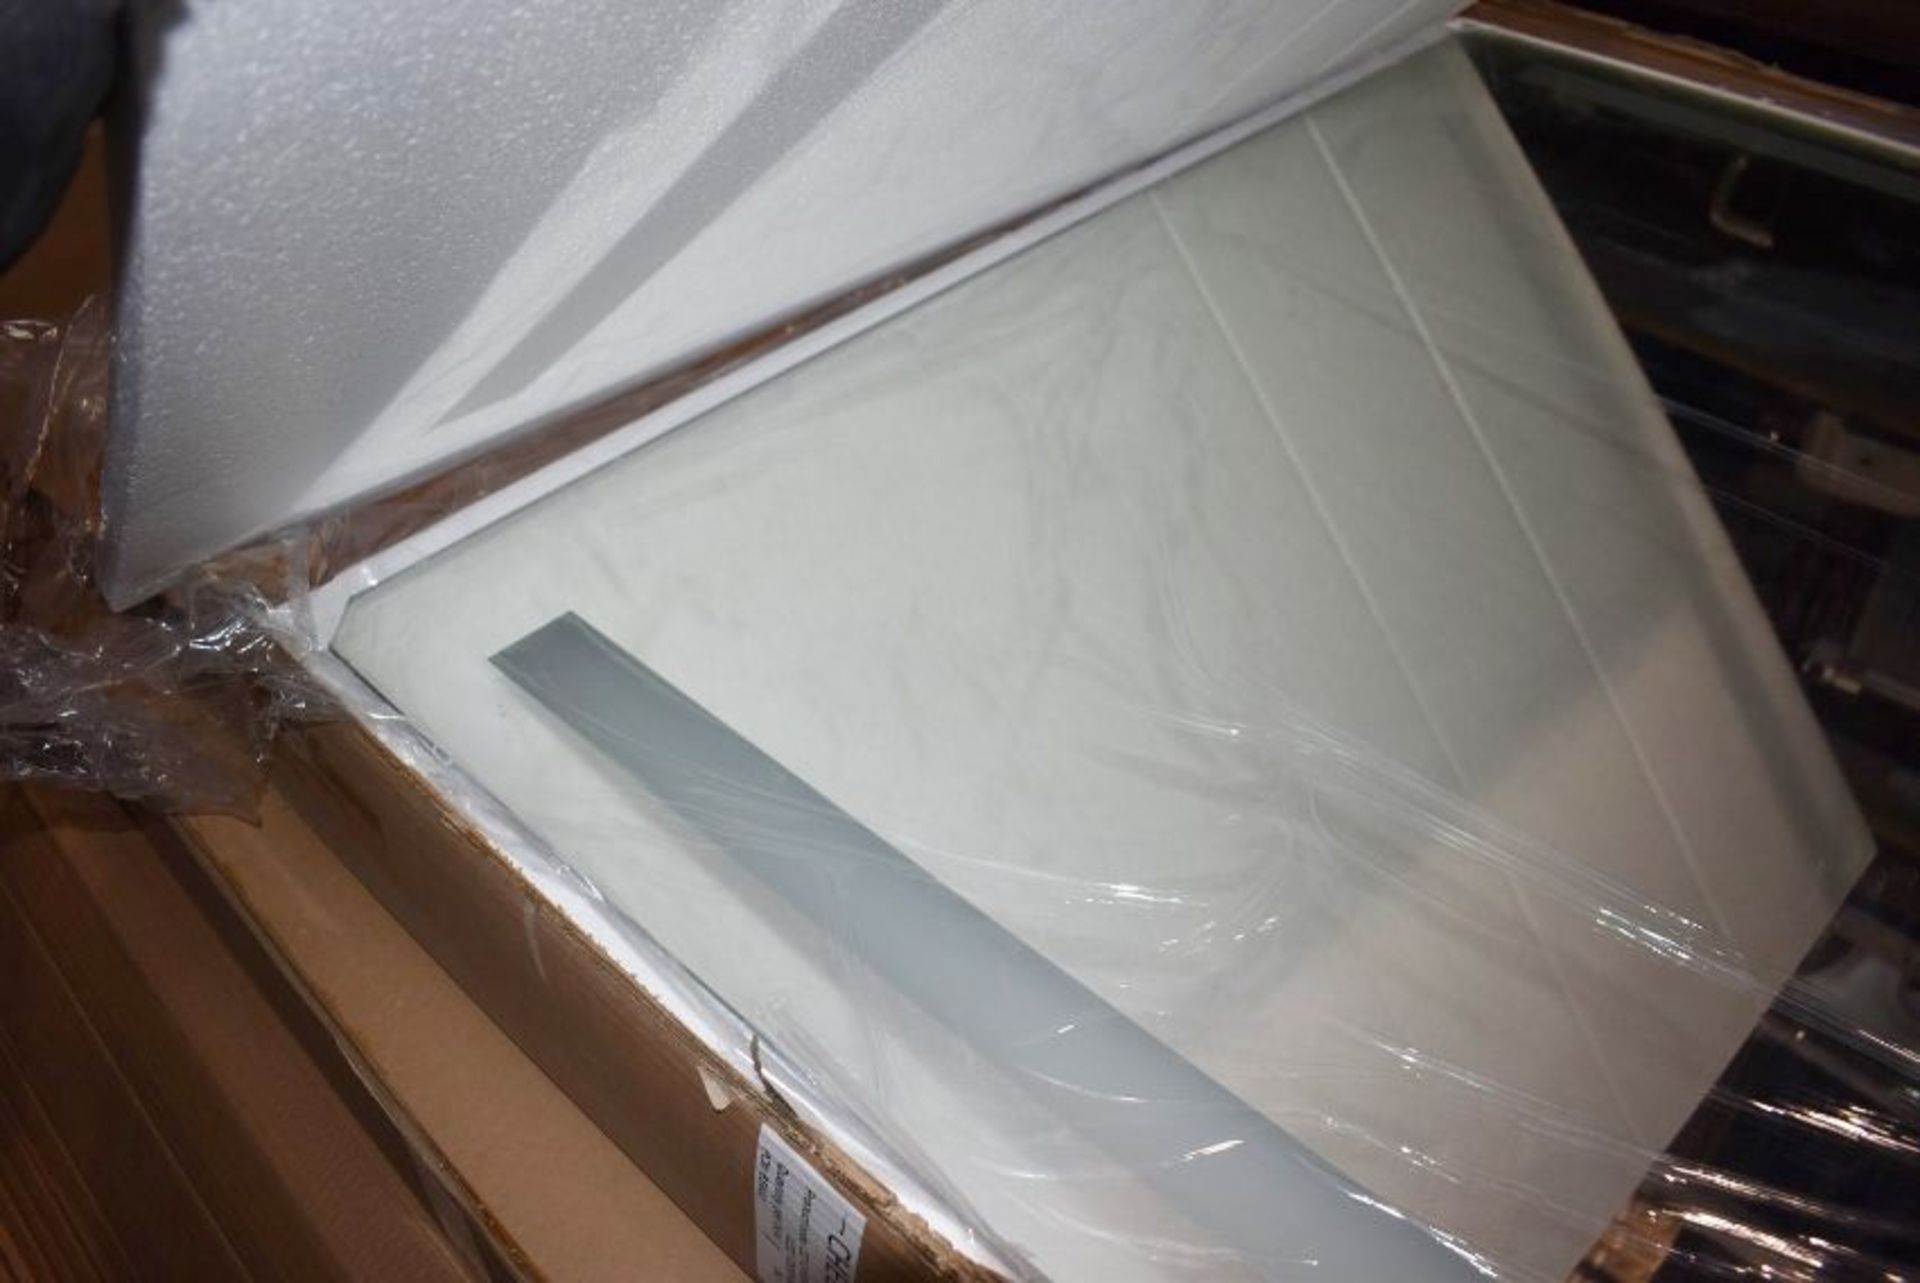 1 x Chelsom Large Illuminated LED Bathroom Mirror With Demister - Brand New Stock - As Used in Major - Image 5 of 13